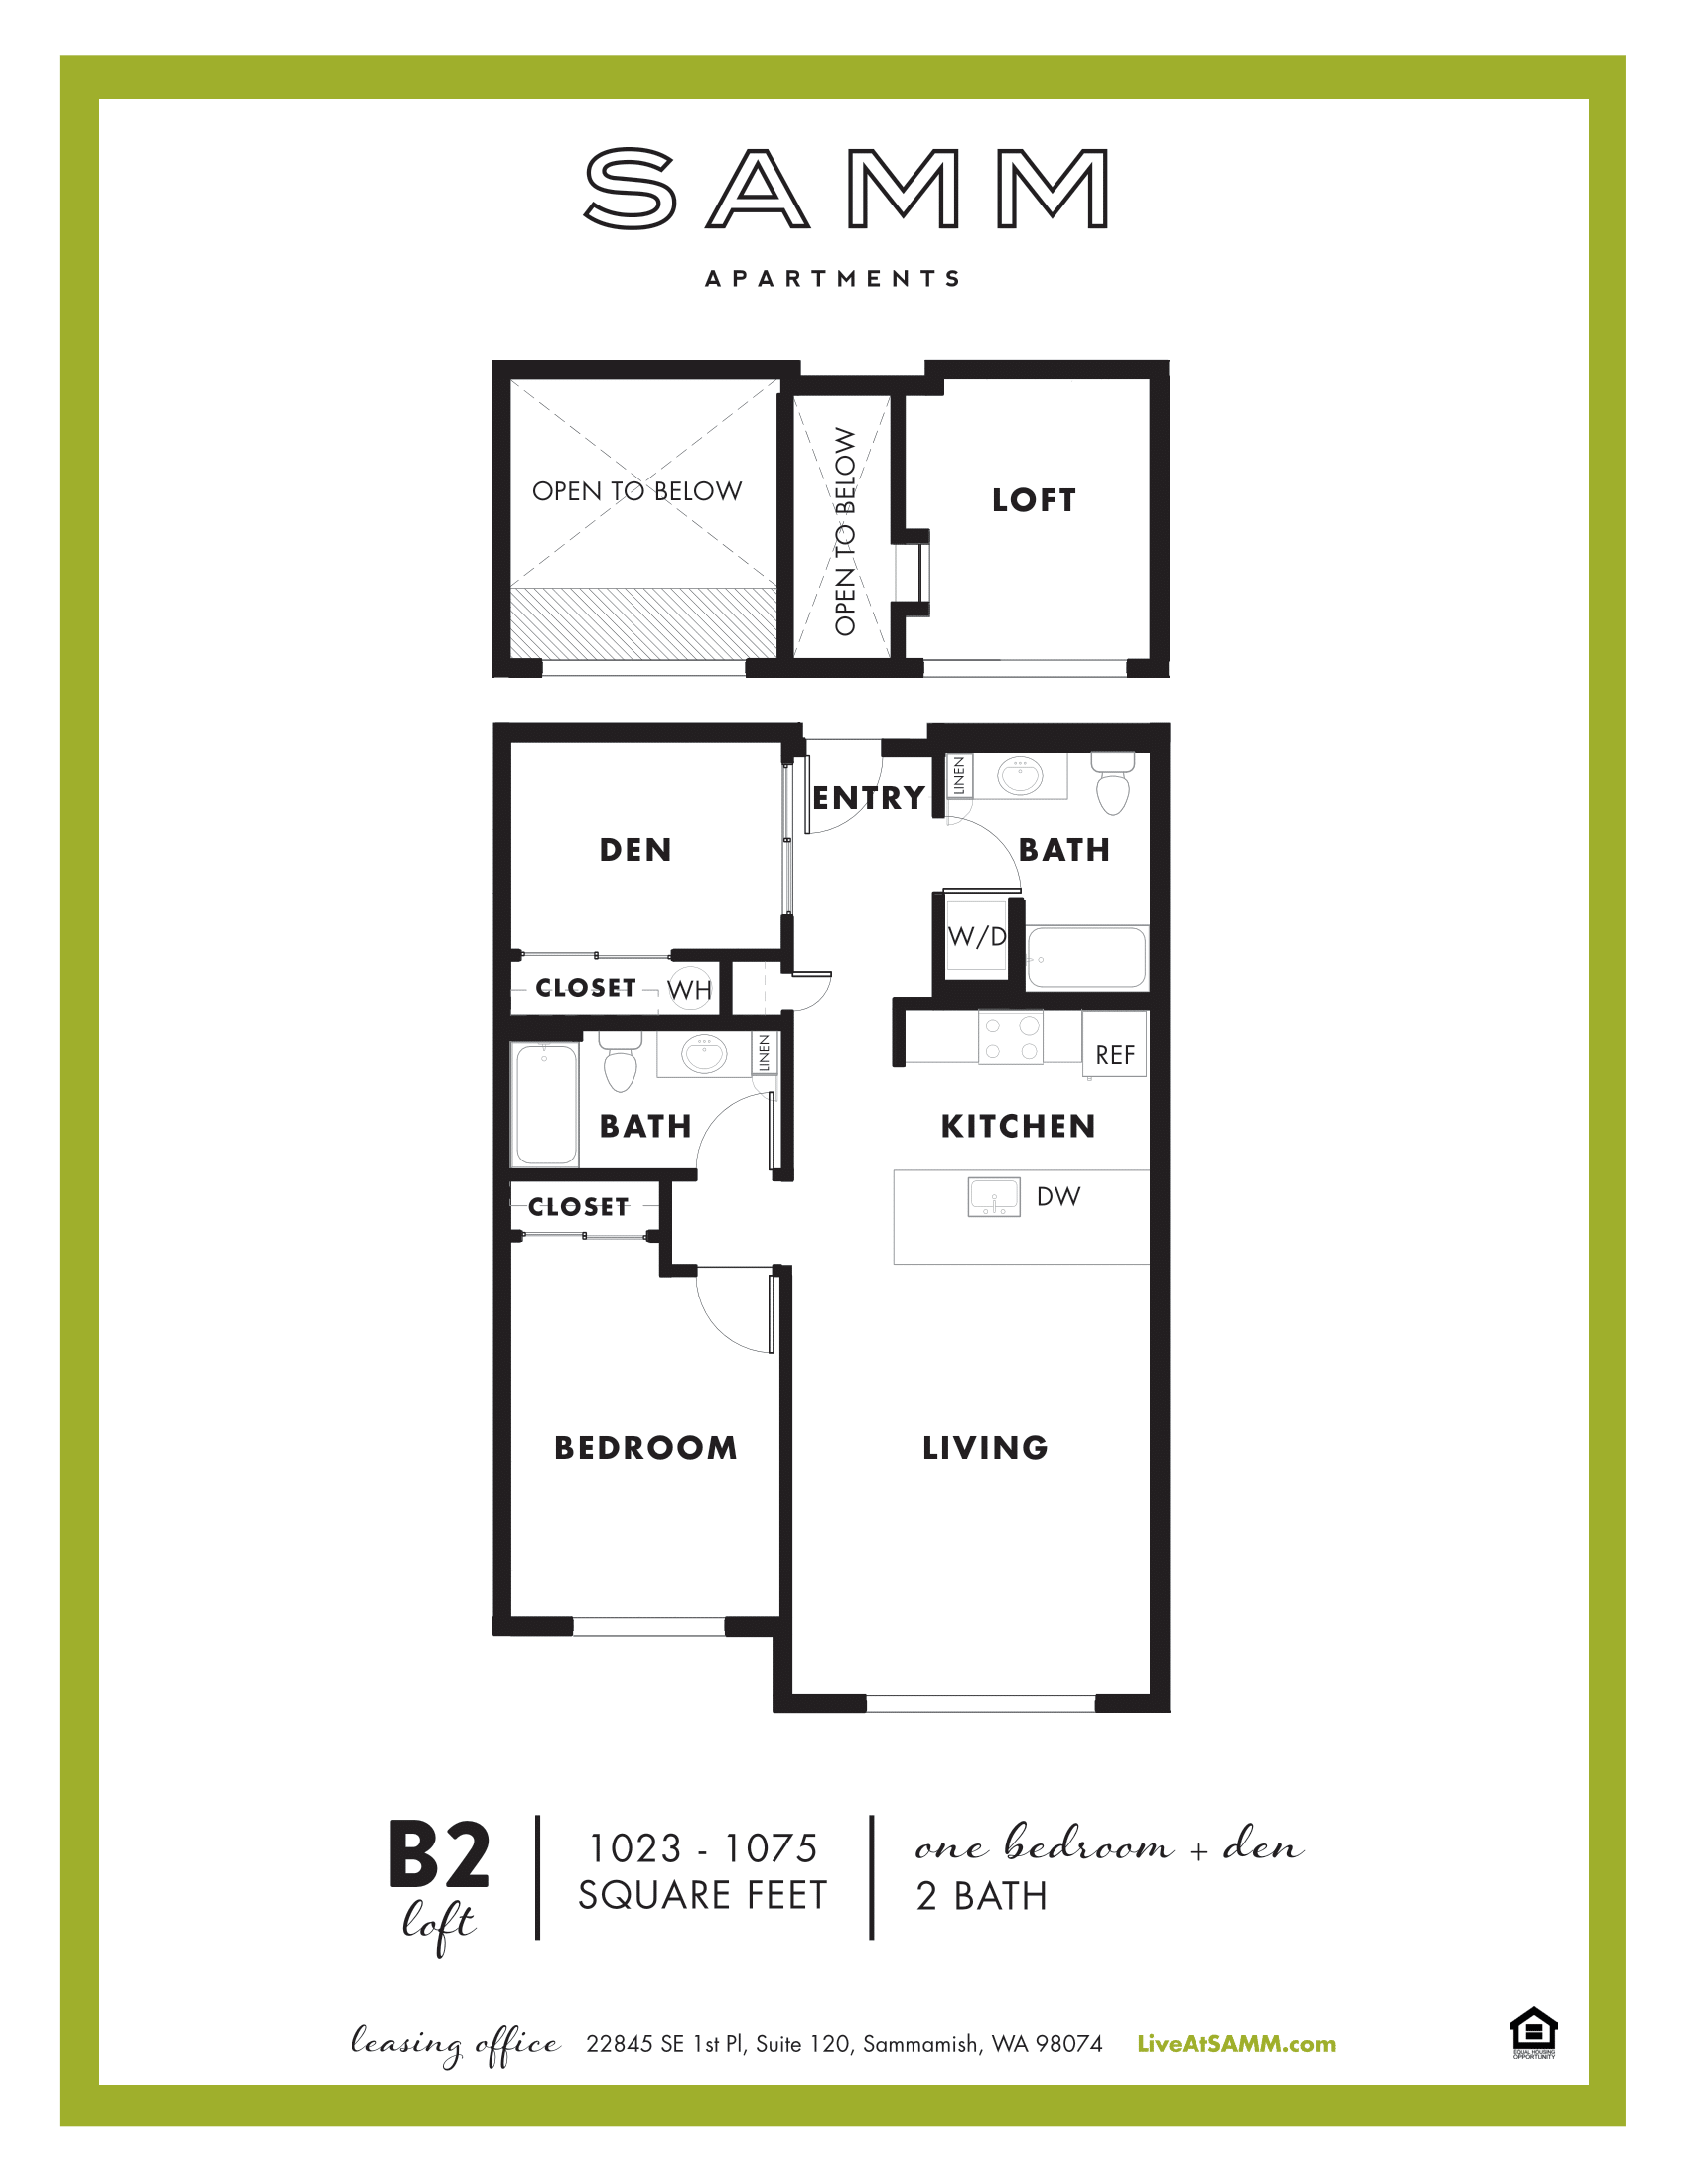 1 Bedroom 2 Bath with Den and Loft